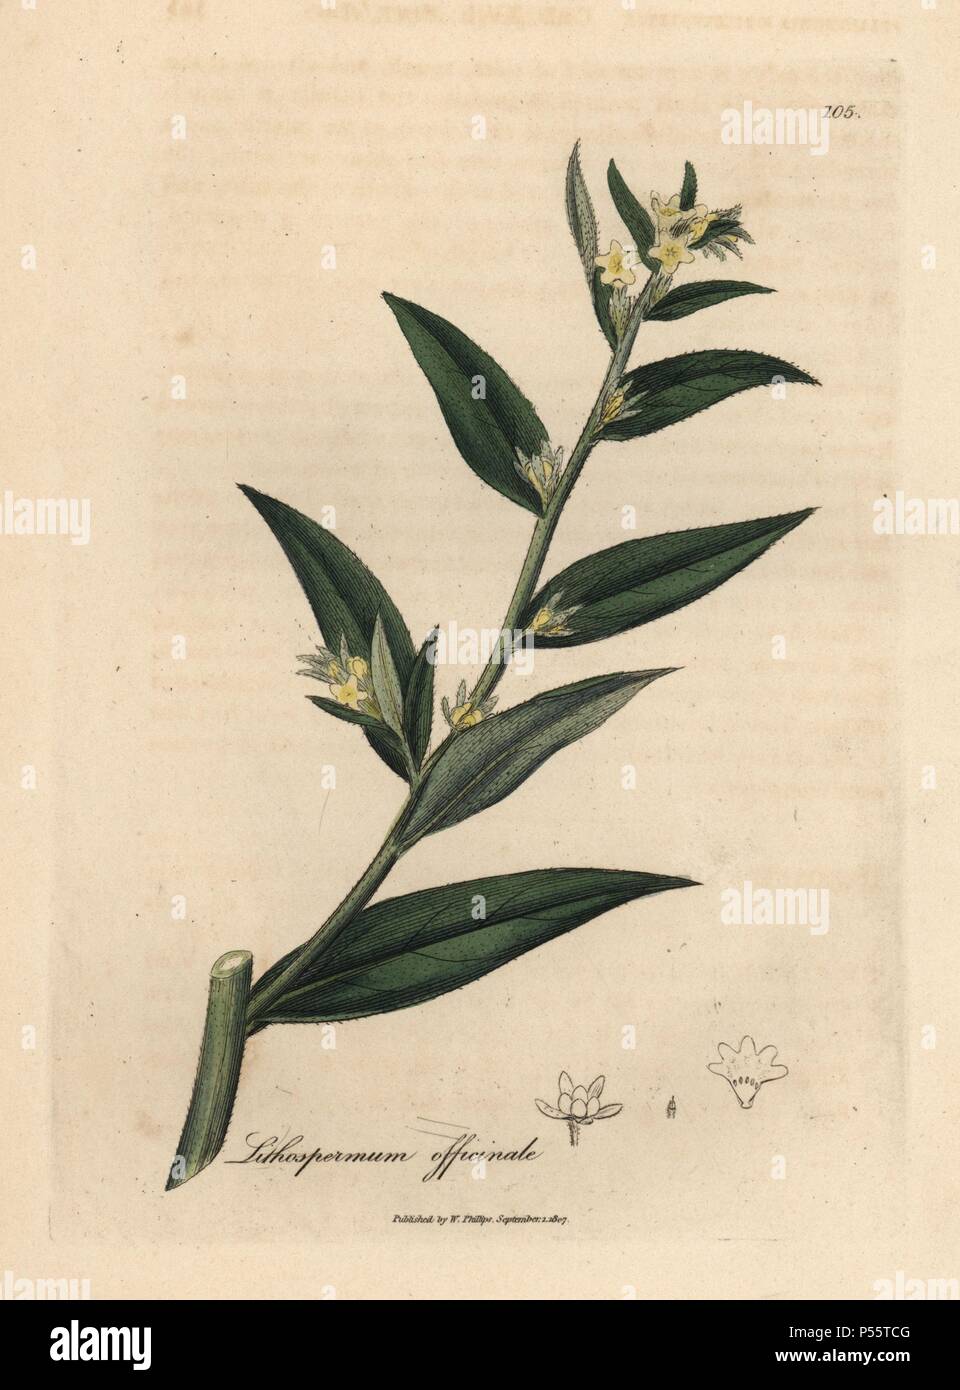 Gromwell, Lithospermum officinale. Handcoloured copperplate engraving from a botanical illustration by James Sowerby from William Woodville and Sir William Jackson Hooker's 'Medical Botany,' John Bohn, London, 1832. The tireless Sowerby (1757-1822) drew over 2, 500 plants for Smith's mammoth 'English Botany' (1790-1814) and 440 mushrooms for 'Coloured Figures of English Fungi ' (1797) among many other works. Stock Photo